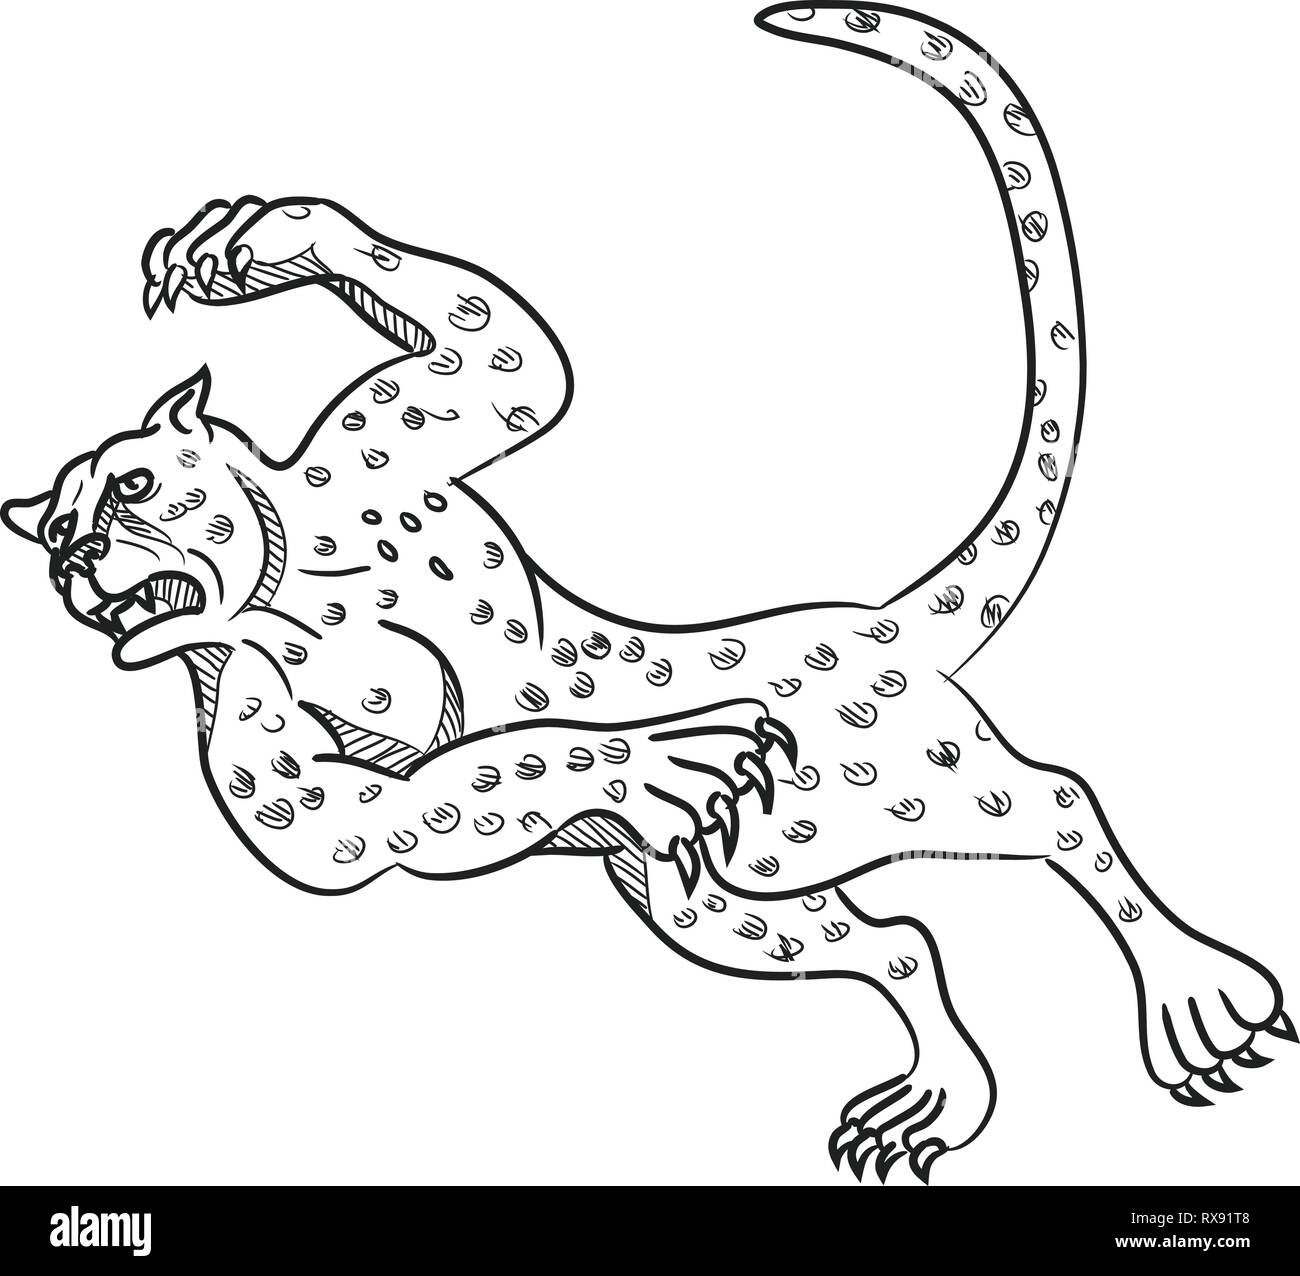 Cartoon style illustration of a cheetah running, tripping and then falling down done in black and white on isolated background. Stock Vector